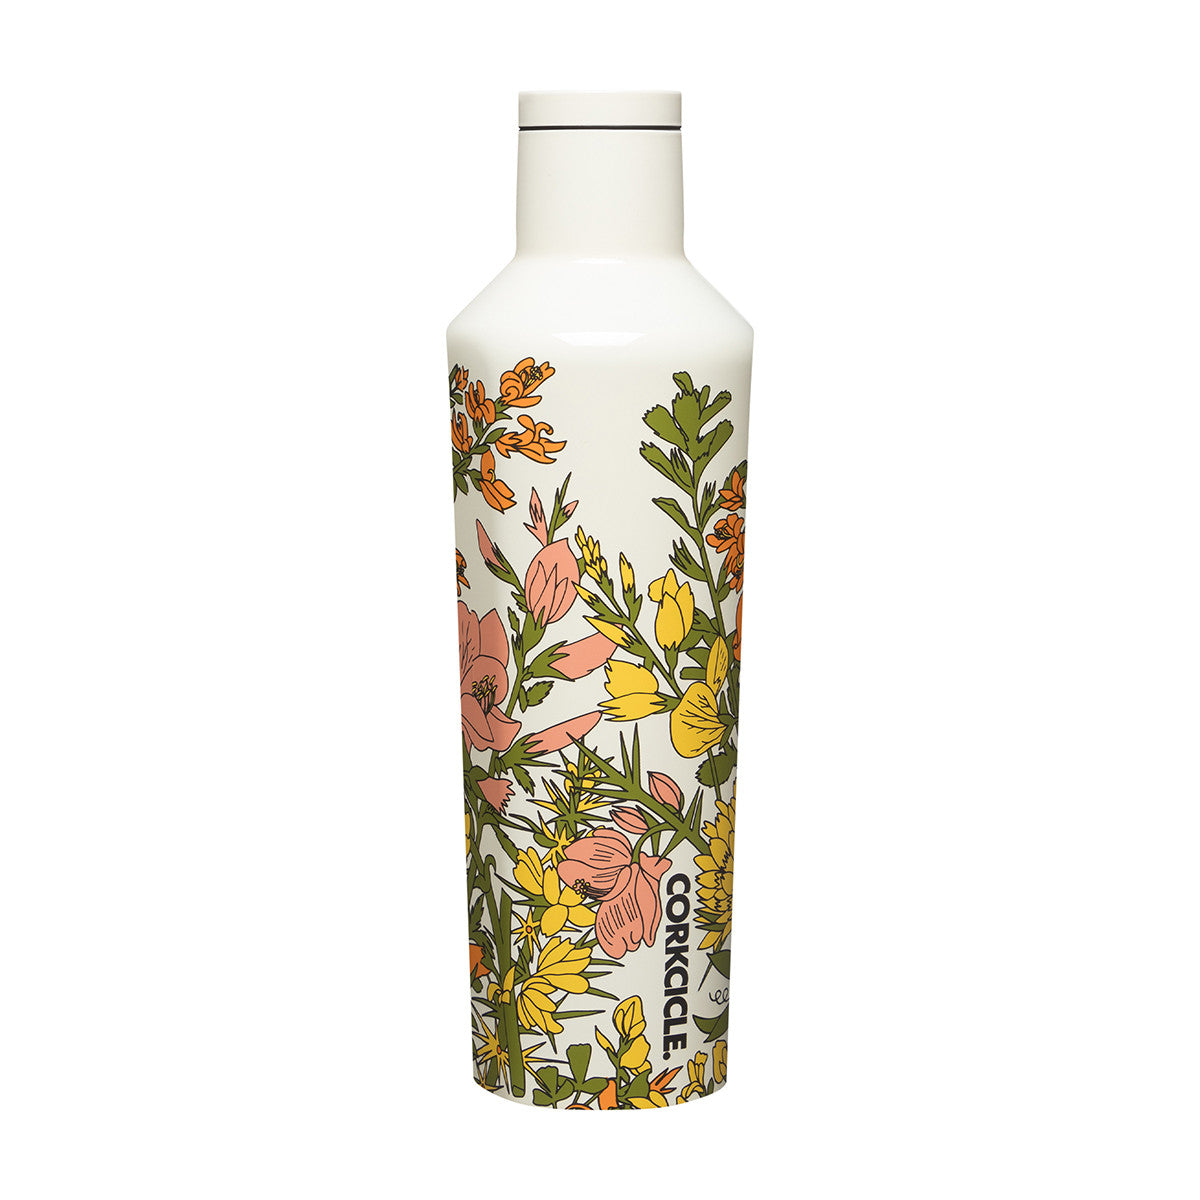 Corkcicle Patterned Canteen 475ml - Wildflower Cream Insulated Stainless Steel Bottle